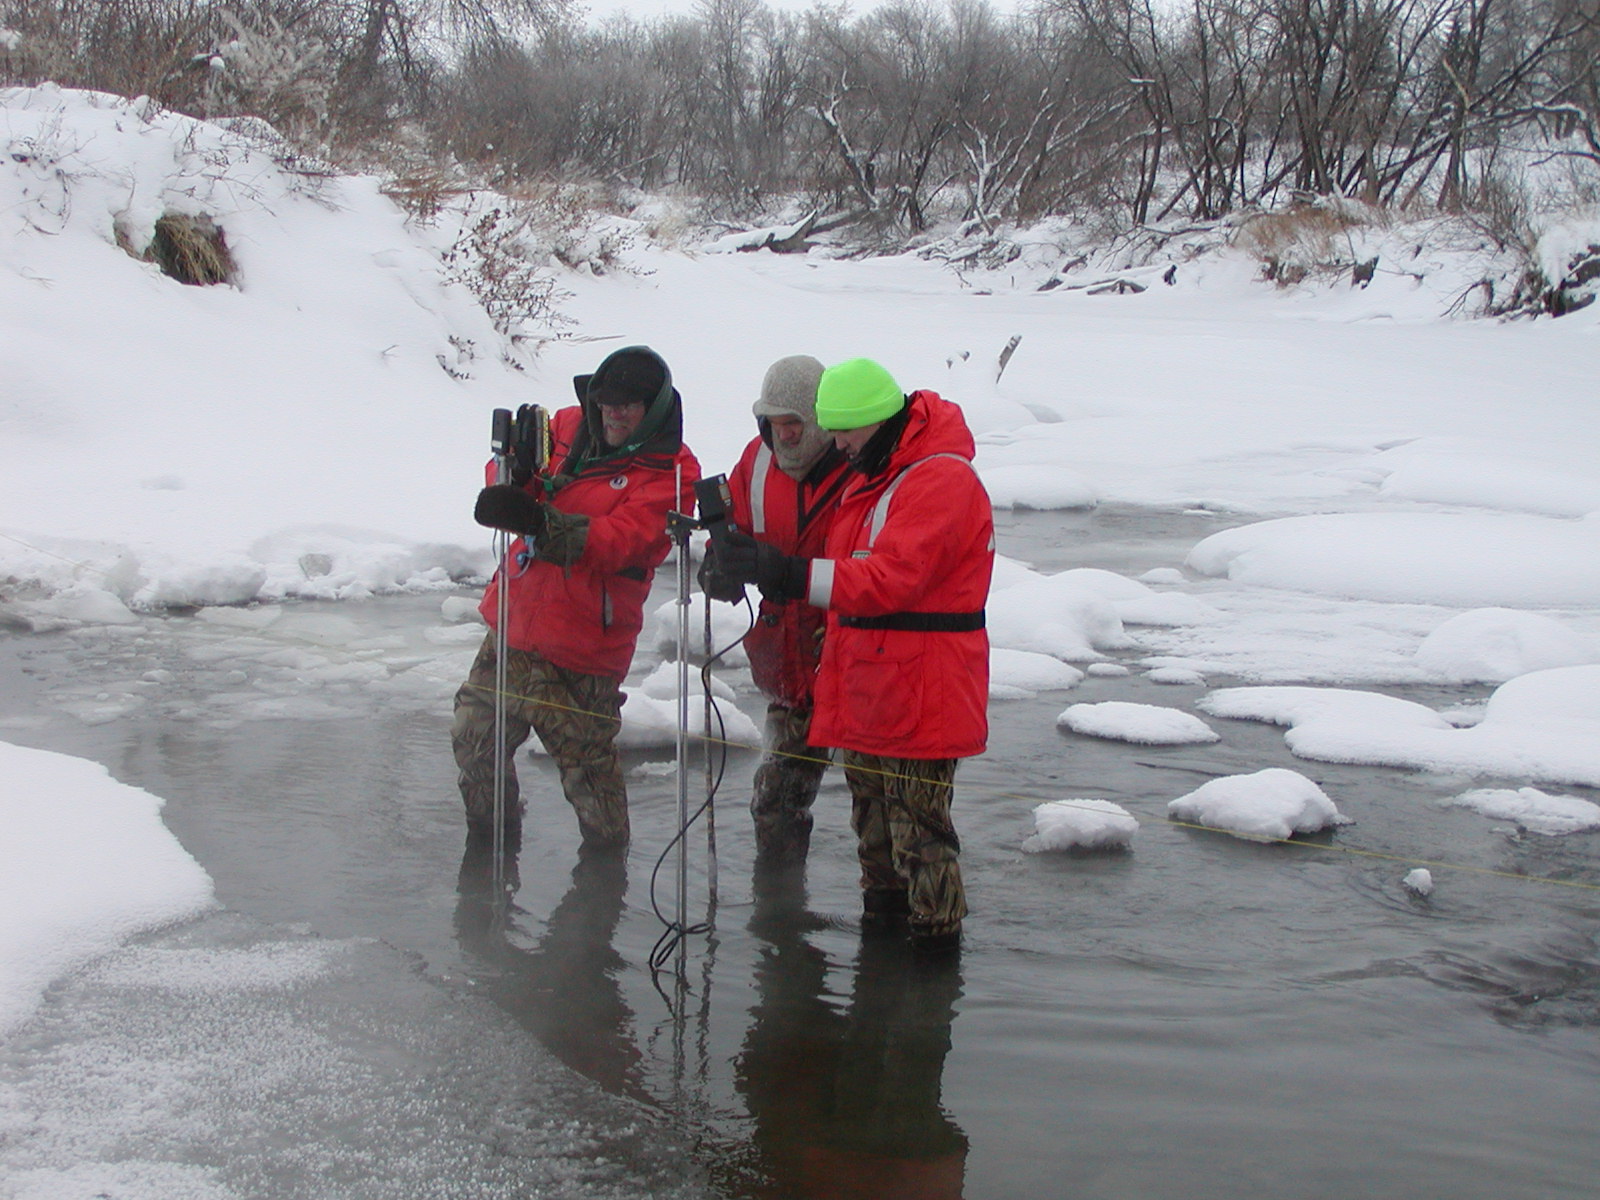 USGS employees at Goose River testing equipment and software in ice conditions